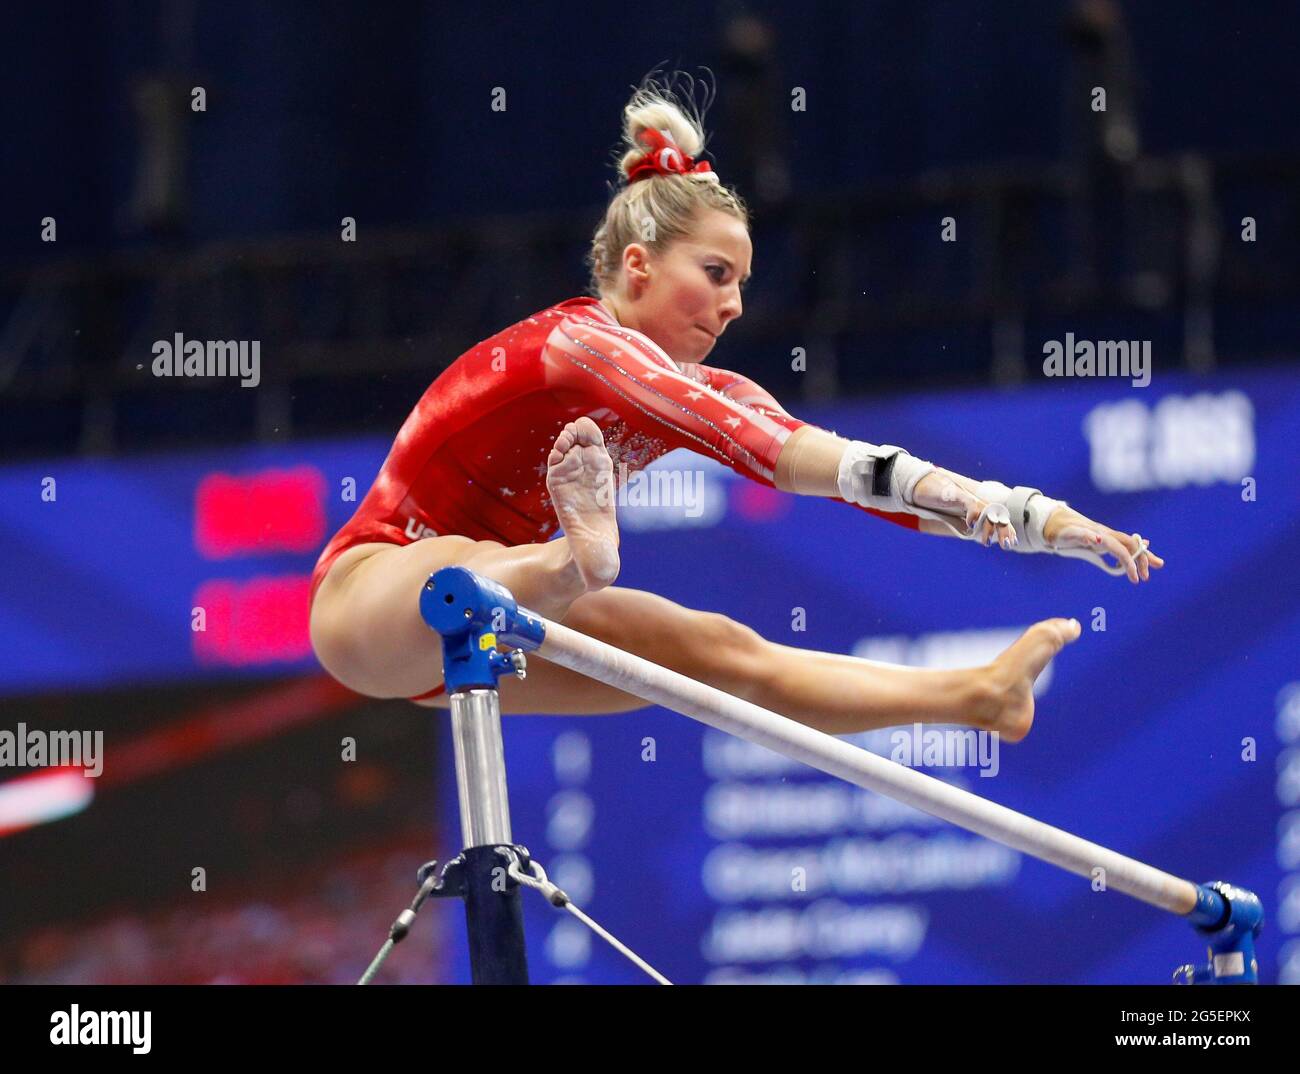 June 25, 2021: MyKayla Skinner performs on the uneven parallel bars during Day 1 of the 2021 U.S. Women's Gymnastics Olympic Team Trials at the Dome at America's Center in St. Louis, MO. Kyle Okita/CSM Stock Photo